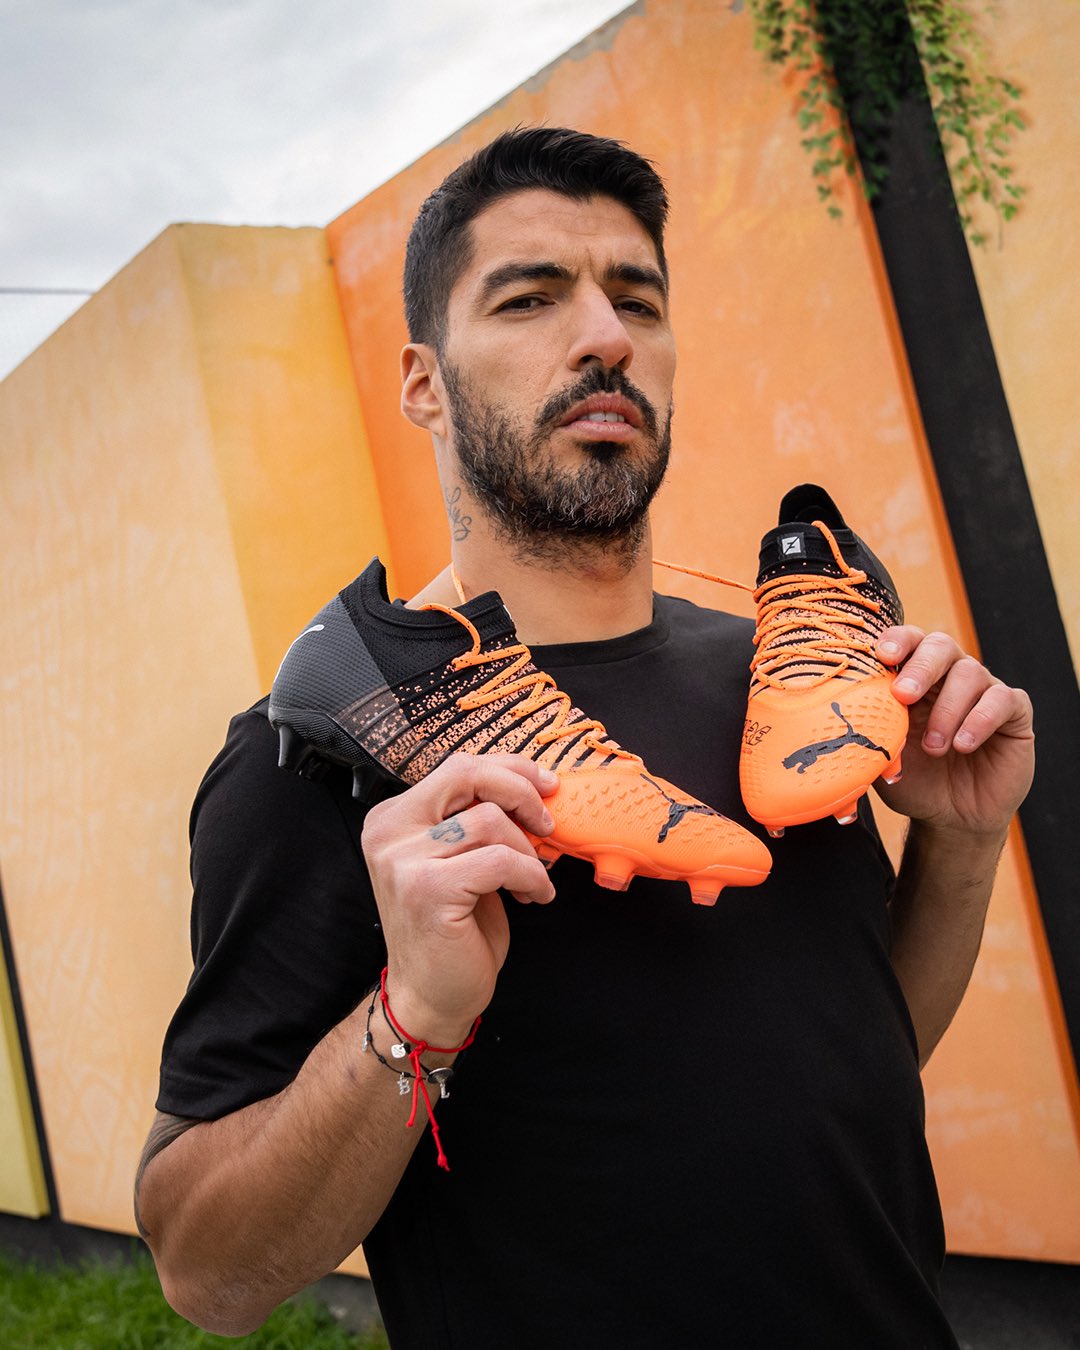 Luis Suárez on Twitter: "Guided by Instinct, led by Z @pumafootball / Twitter